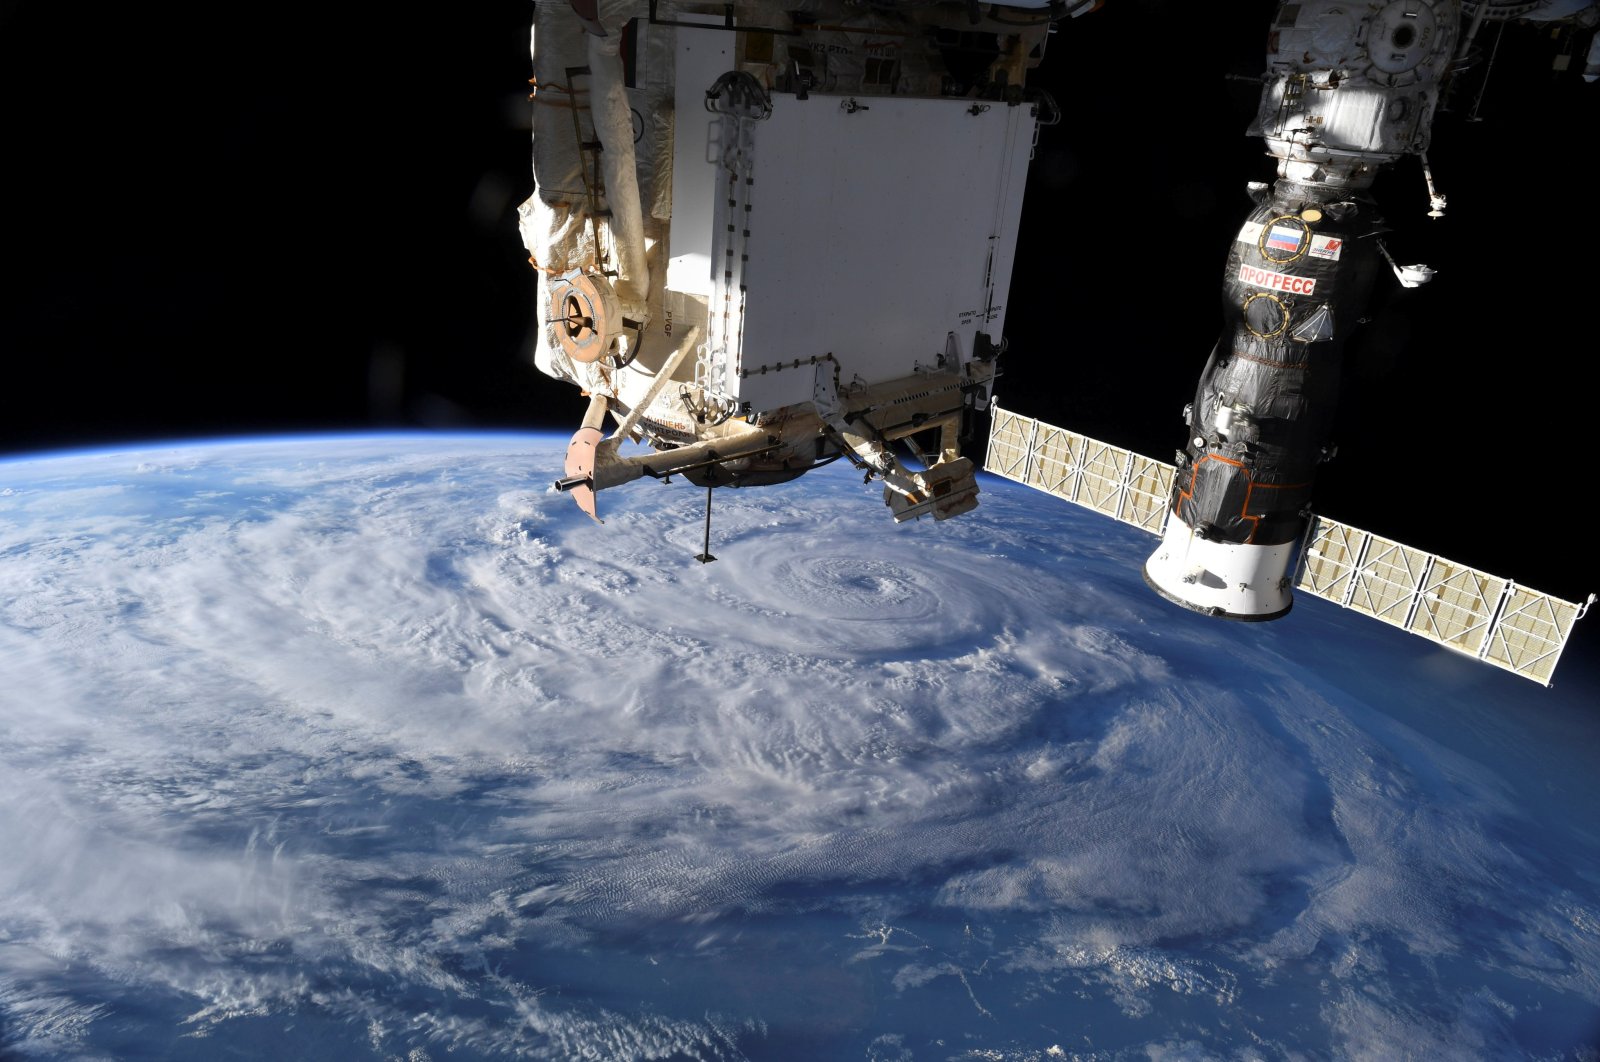 Hurricane Genevieve is seen from the International Space Station (ISS) orbiting Earth in an image taken by NASA astronaut Christopher J. Cassidy, Aug. 19, 2020. (NASA Photo via Reuters)